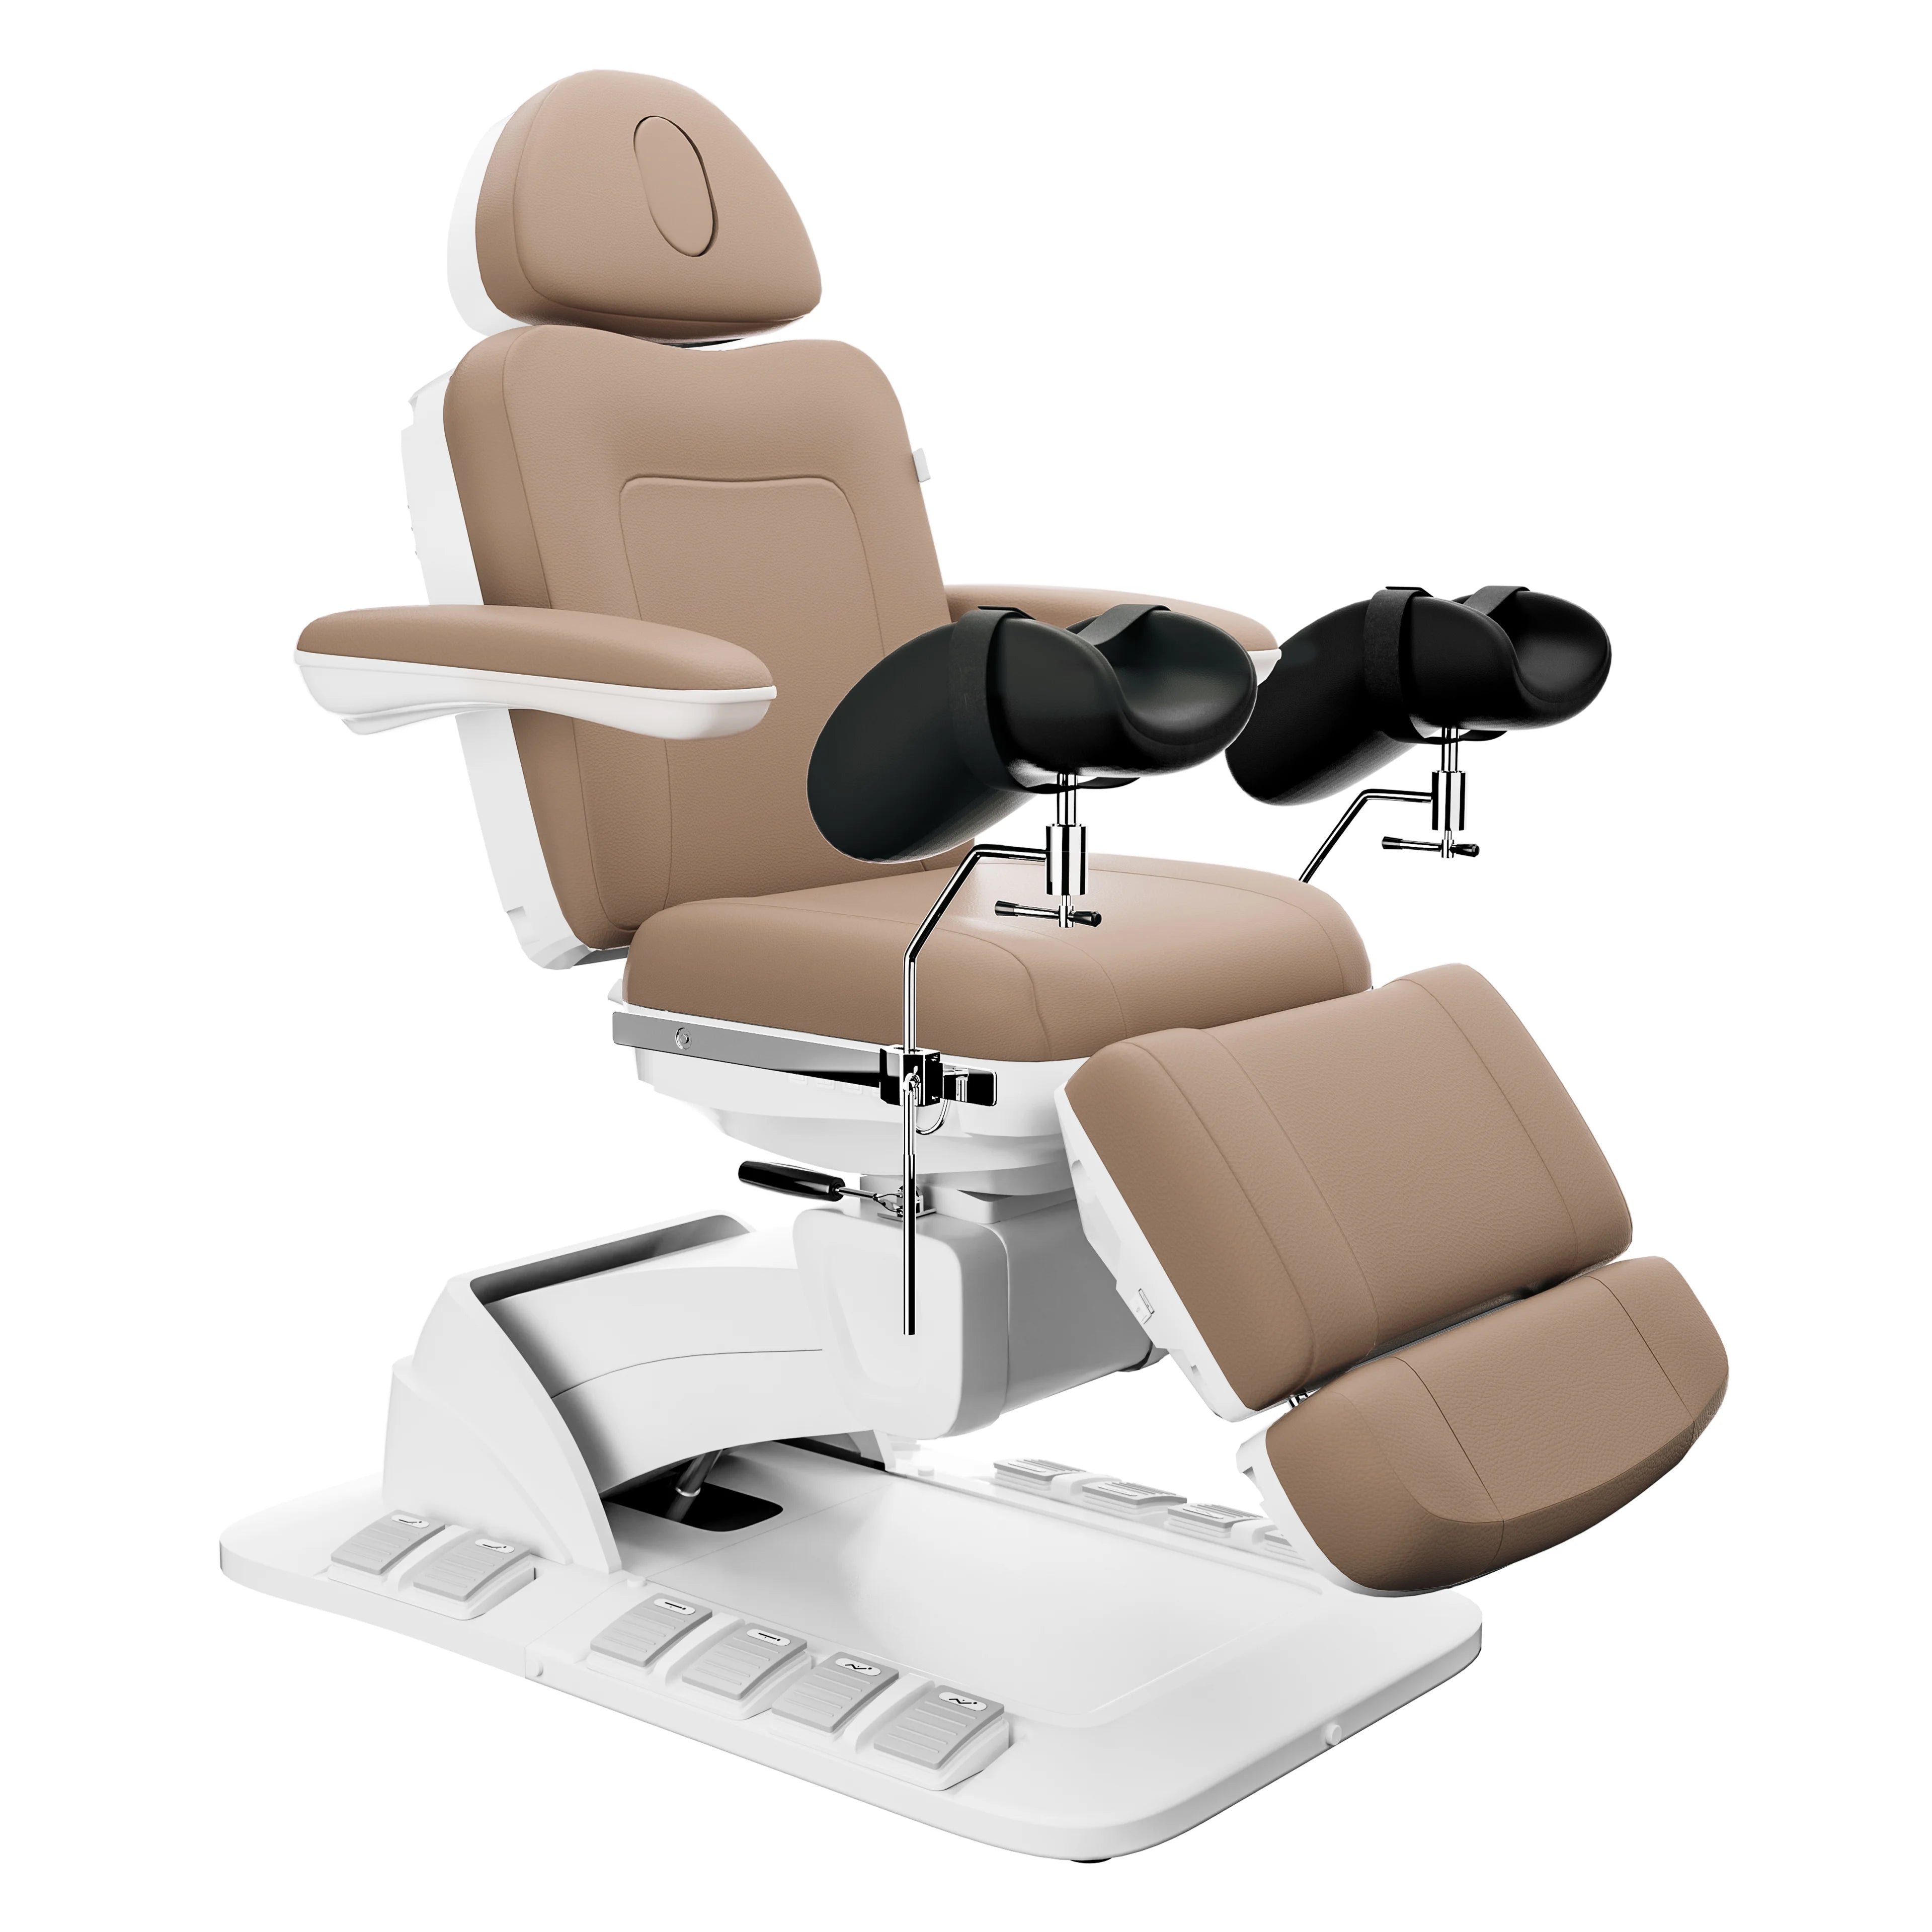 SPAMARC . Novato (Brown) . OBGYN & GYNECOLOGY . STIRRUPS . ROTATING . 4 MOTOR SPA TREATMENT CHAIR/BED